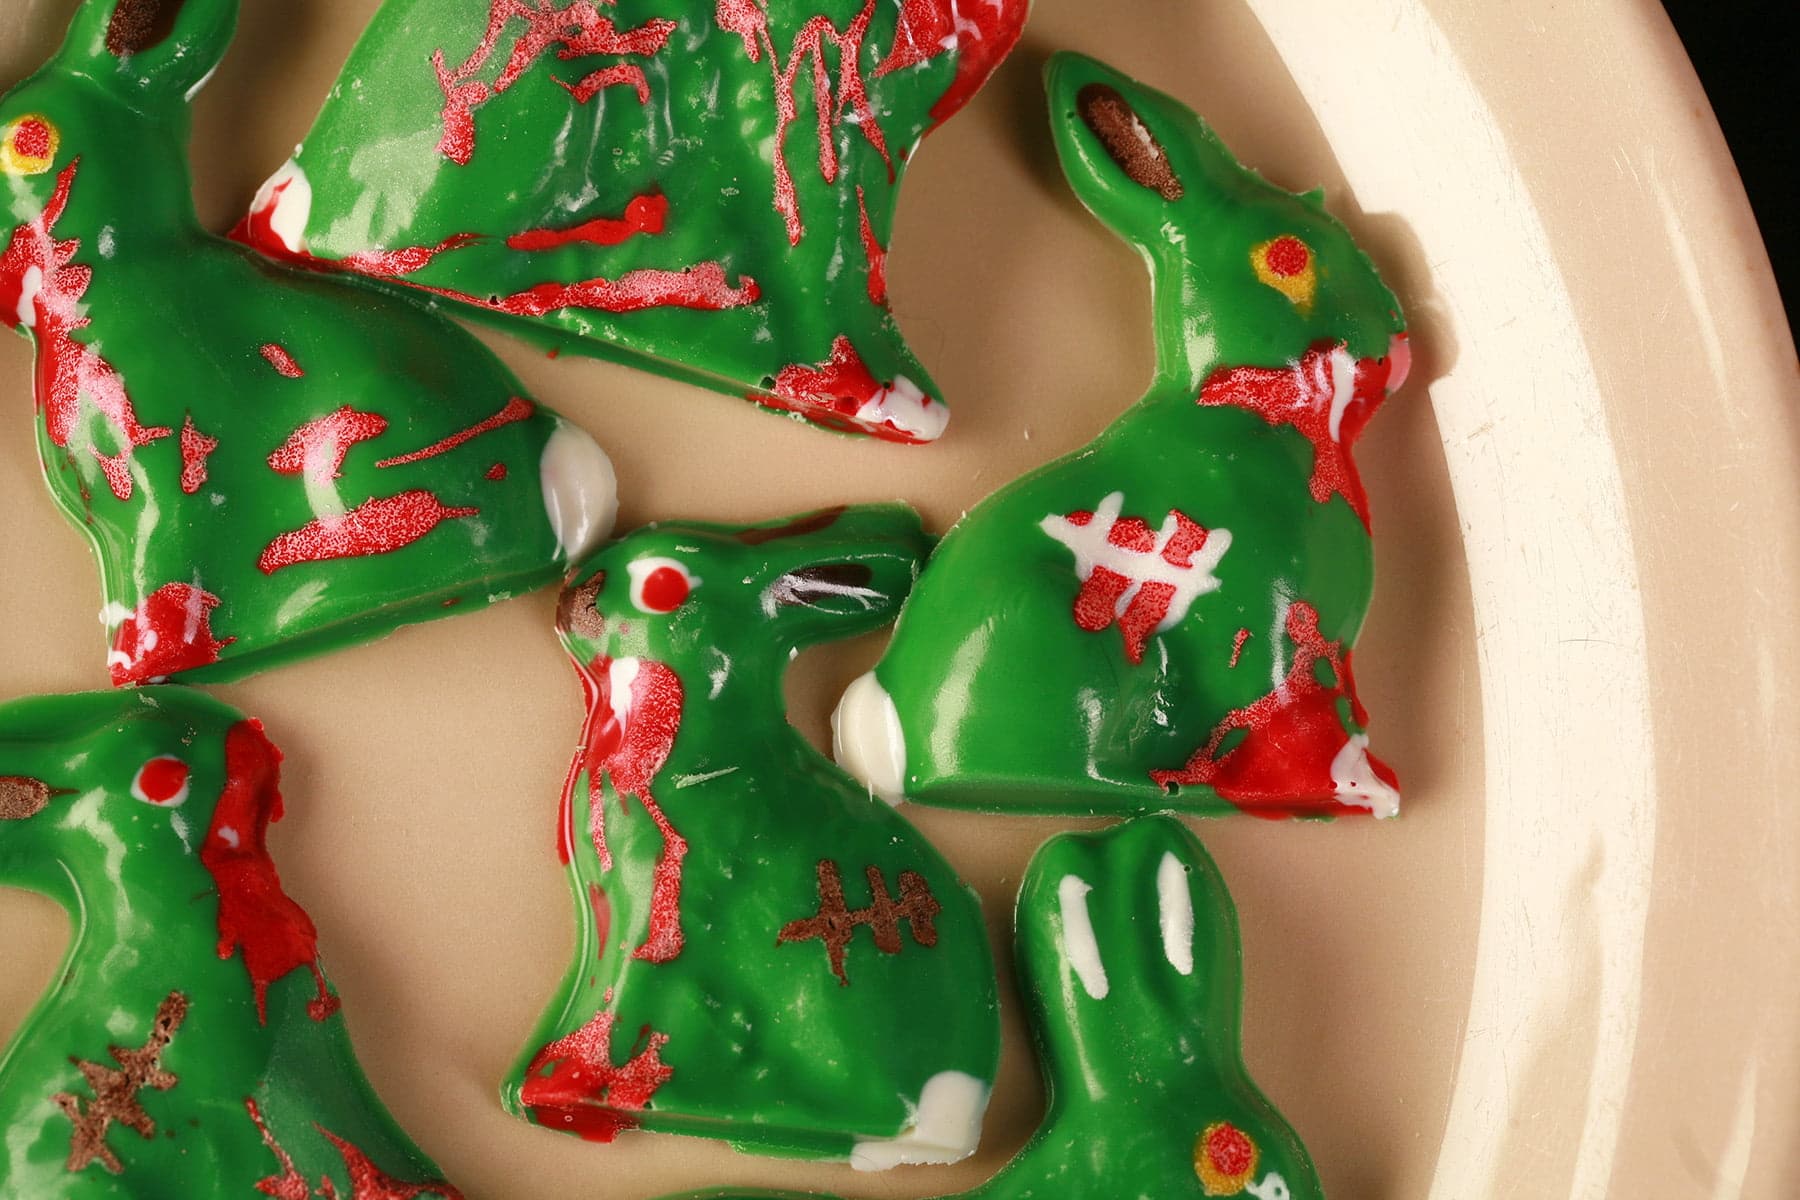 6 different Chocolate Zombie Easter Bunnies are arranged on a beige coloured oval plate. They're all green woth red, white, and brown designs to make them look blood spattered, scarred, etc.